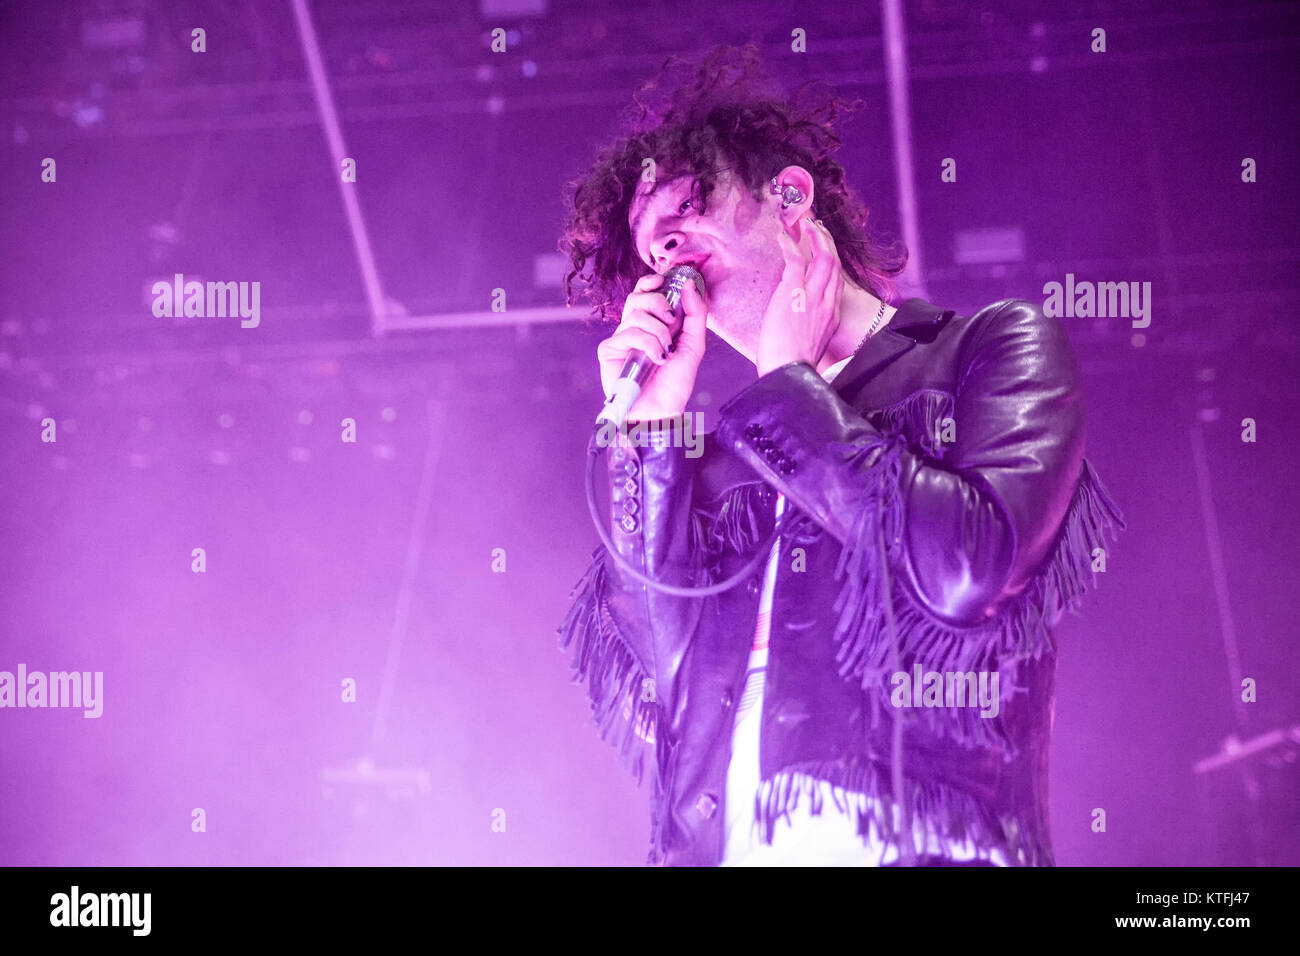 The English indie rock band The 1975 performs a live concert at Oslo Spektrum. Here lead singer Matthew Healy is seen live on stage. Norway, 05/04 2016. Stock Photo